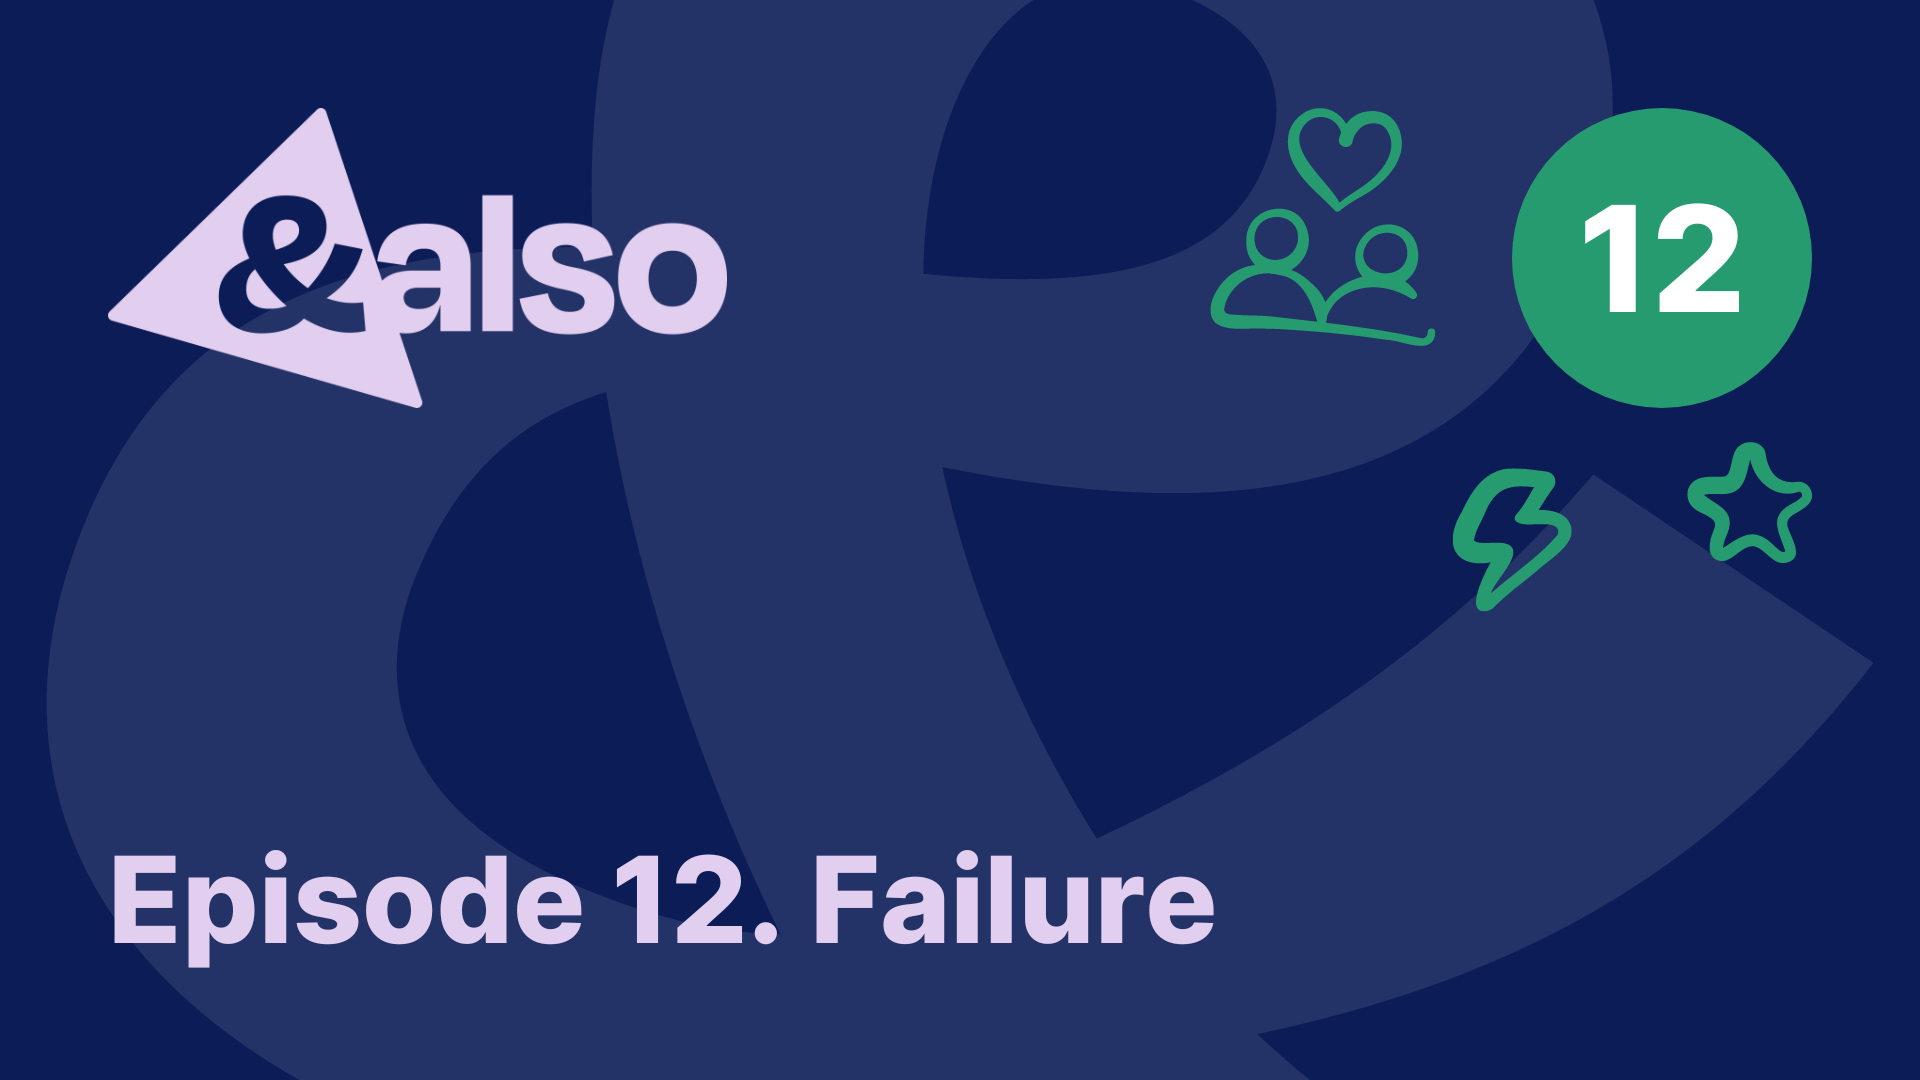 AndAlso: A Podcast – Episode 12. Failure